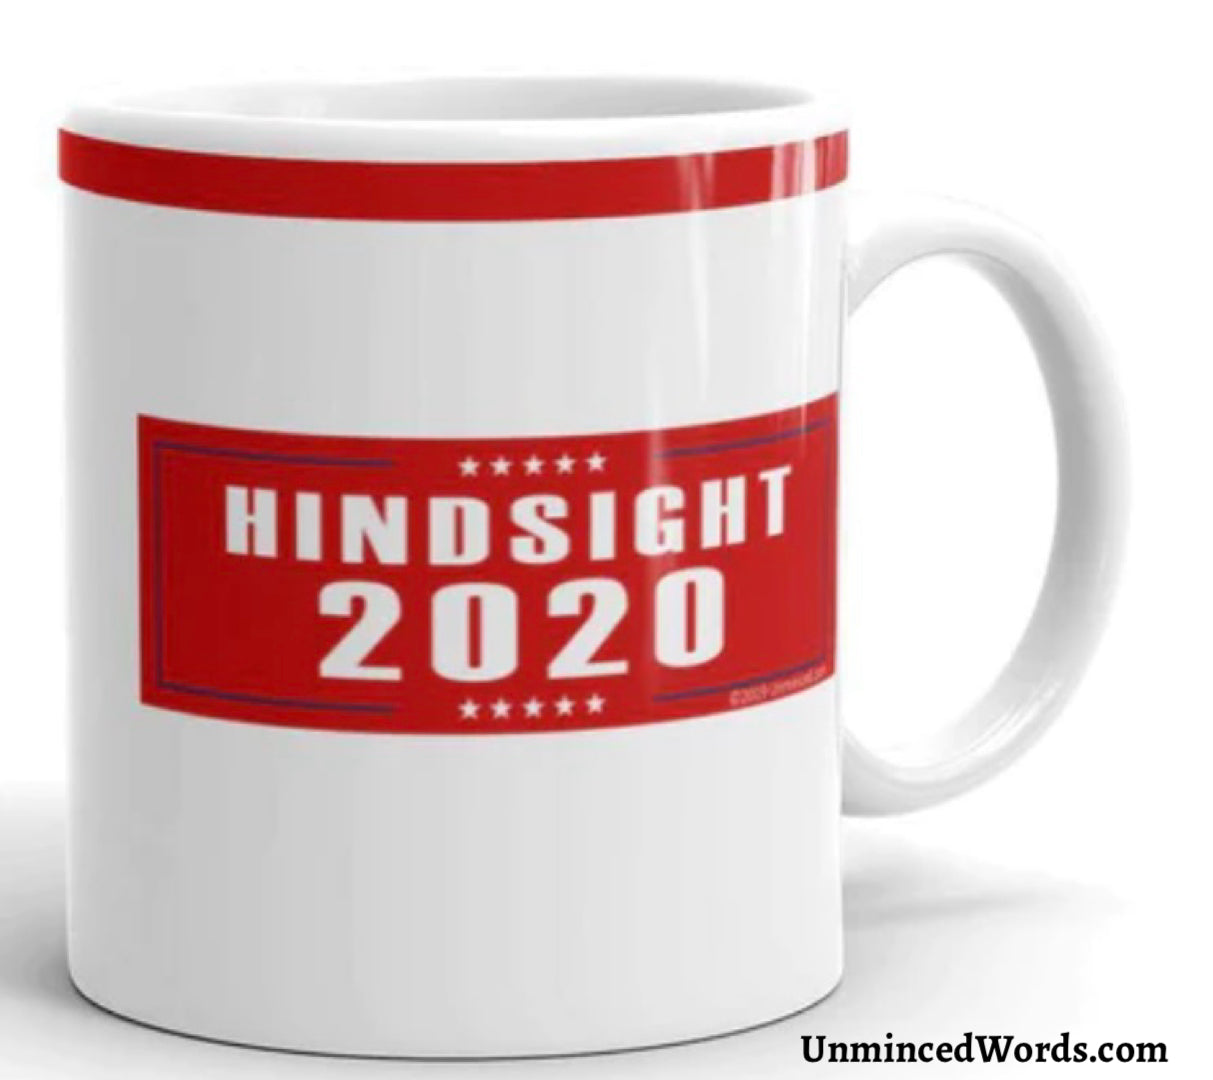 HINDSIGHT 2020 is how we see it here at UnmincedWords.